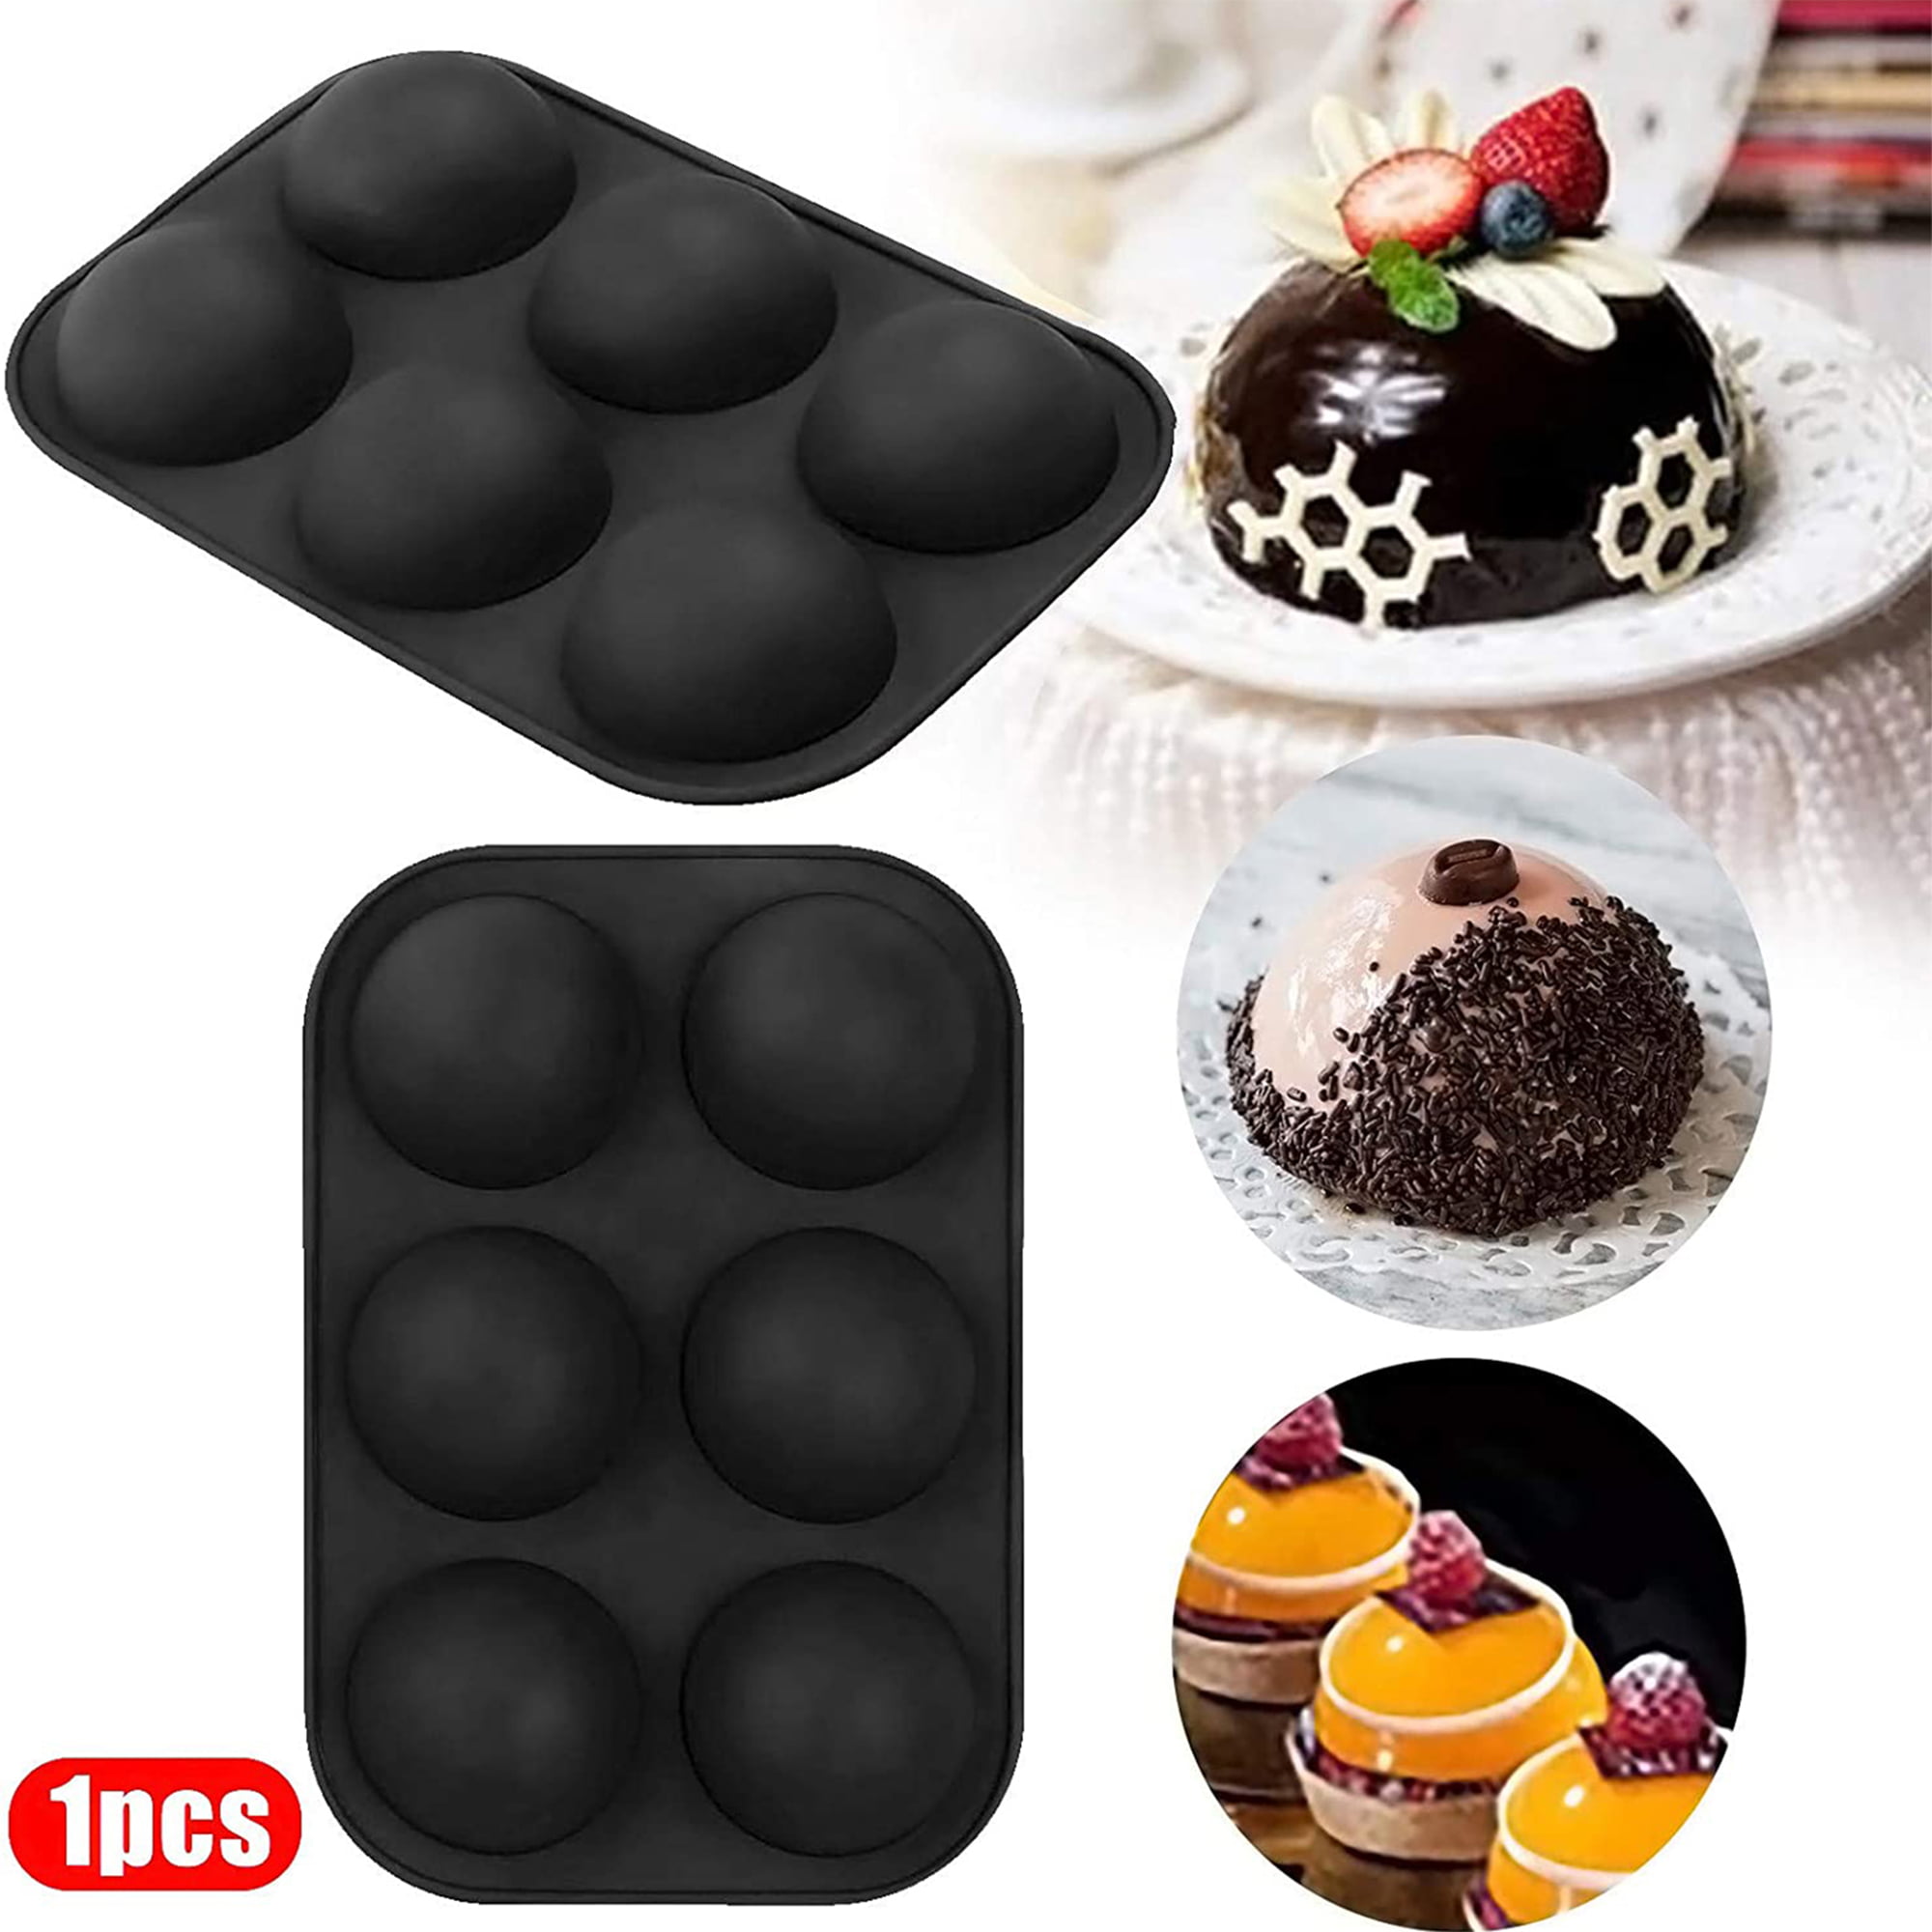 Sphere Silicone Mold- Silicone Baking Mold-6 Holes Silicone Mold for Chocolate Cake Pudding Handmade Soap,Baking DIY Mold Ball Baking Mold 